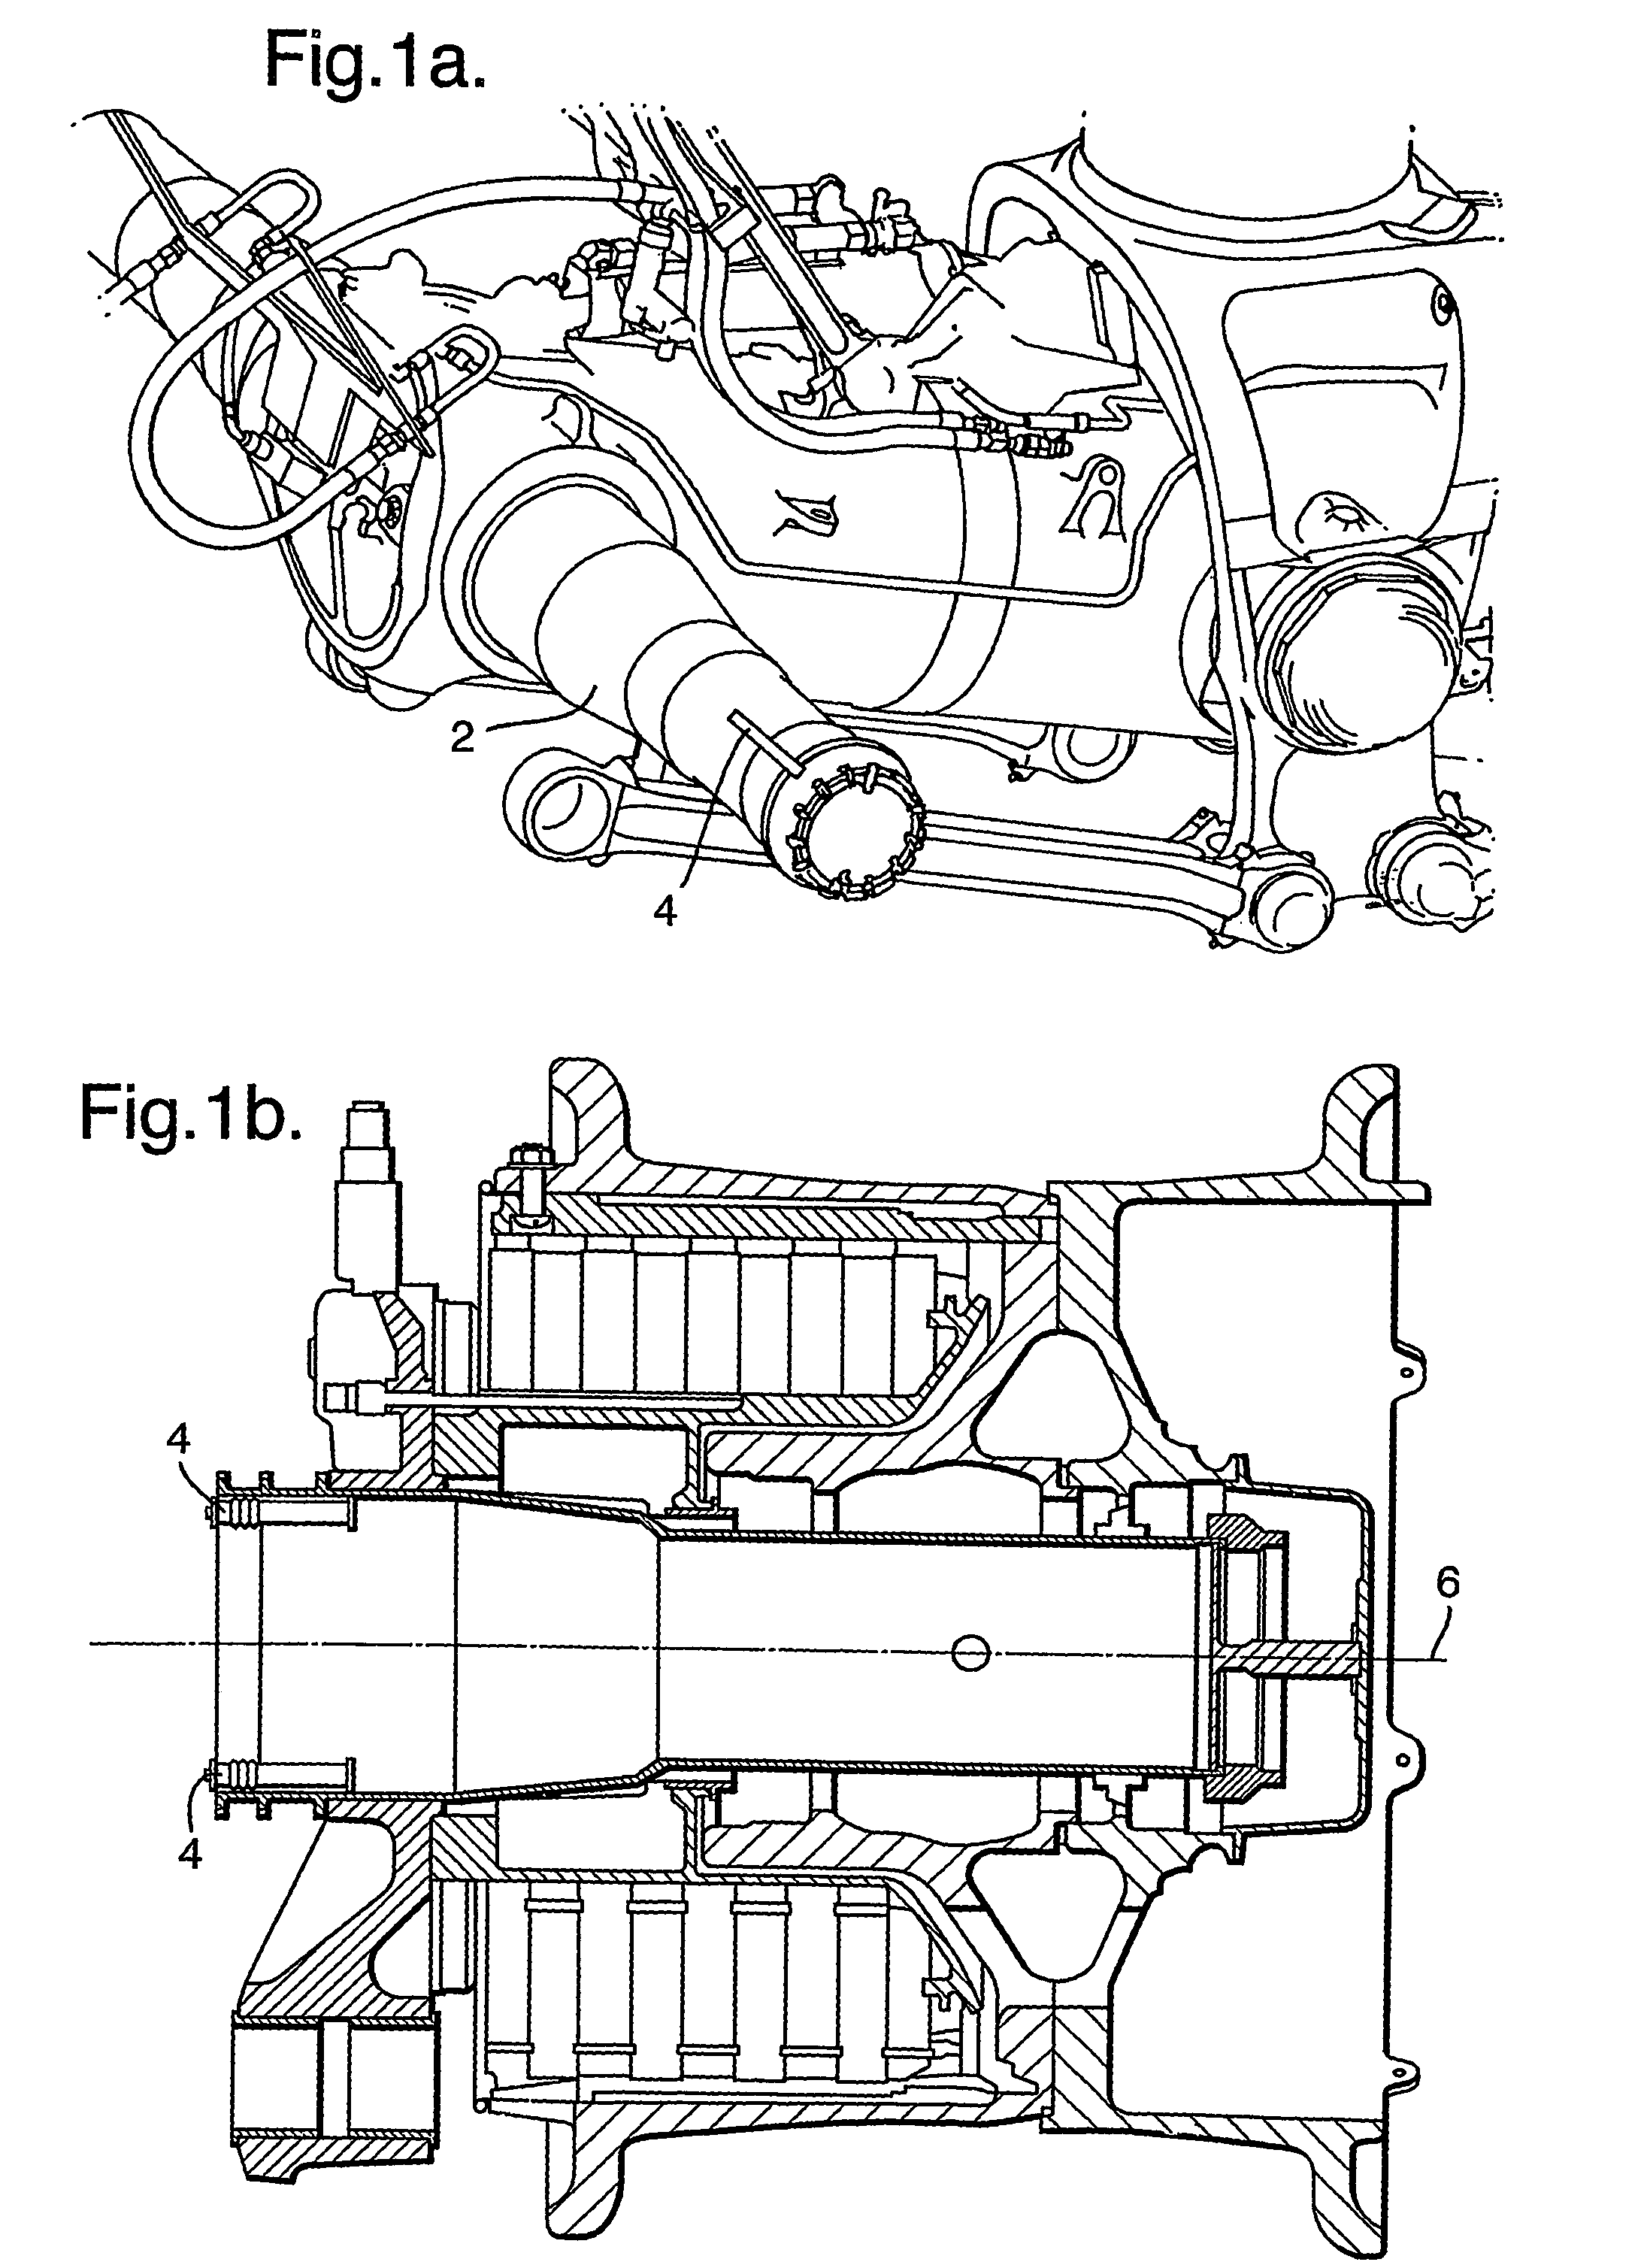 Apparatus and method suitable for measuring the displacement or load on an aircraft component